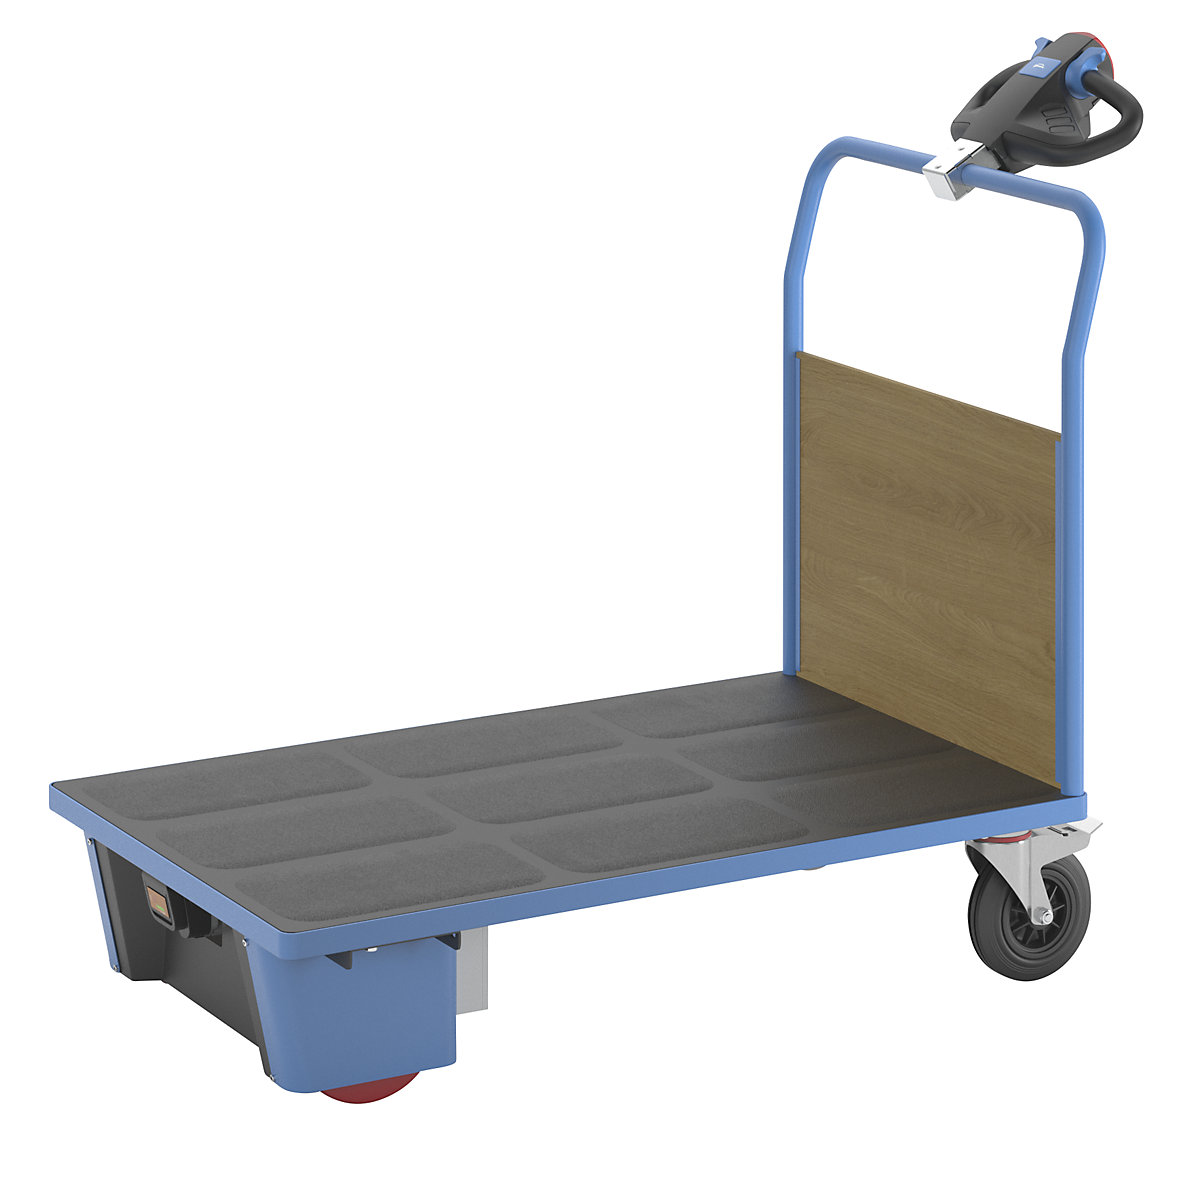 Platform truck with electric drive – eurokraft pro, 1 MDF end panel, LxWxH 1570 x 800 x 1300 mm-13